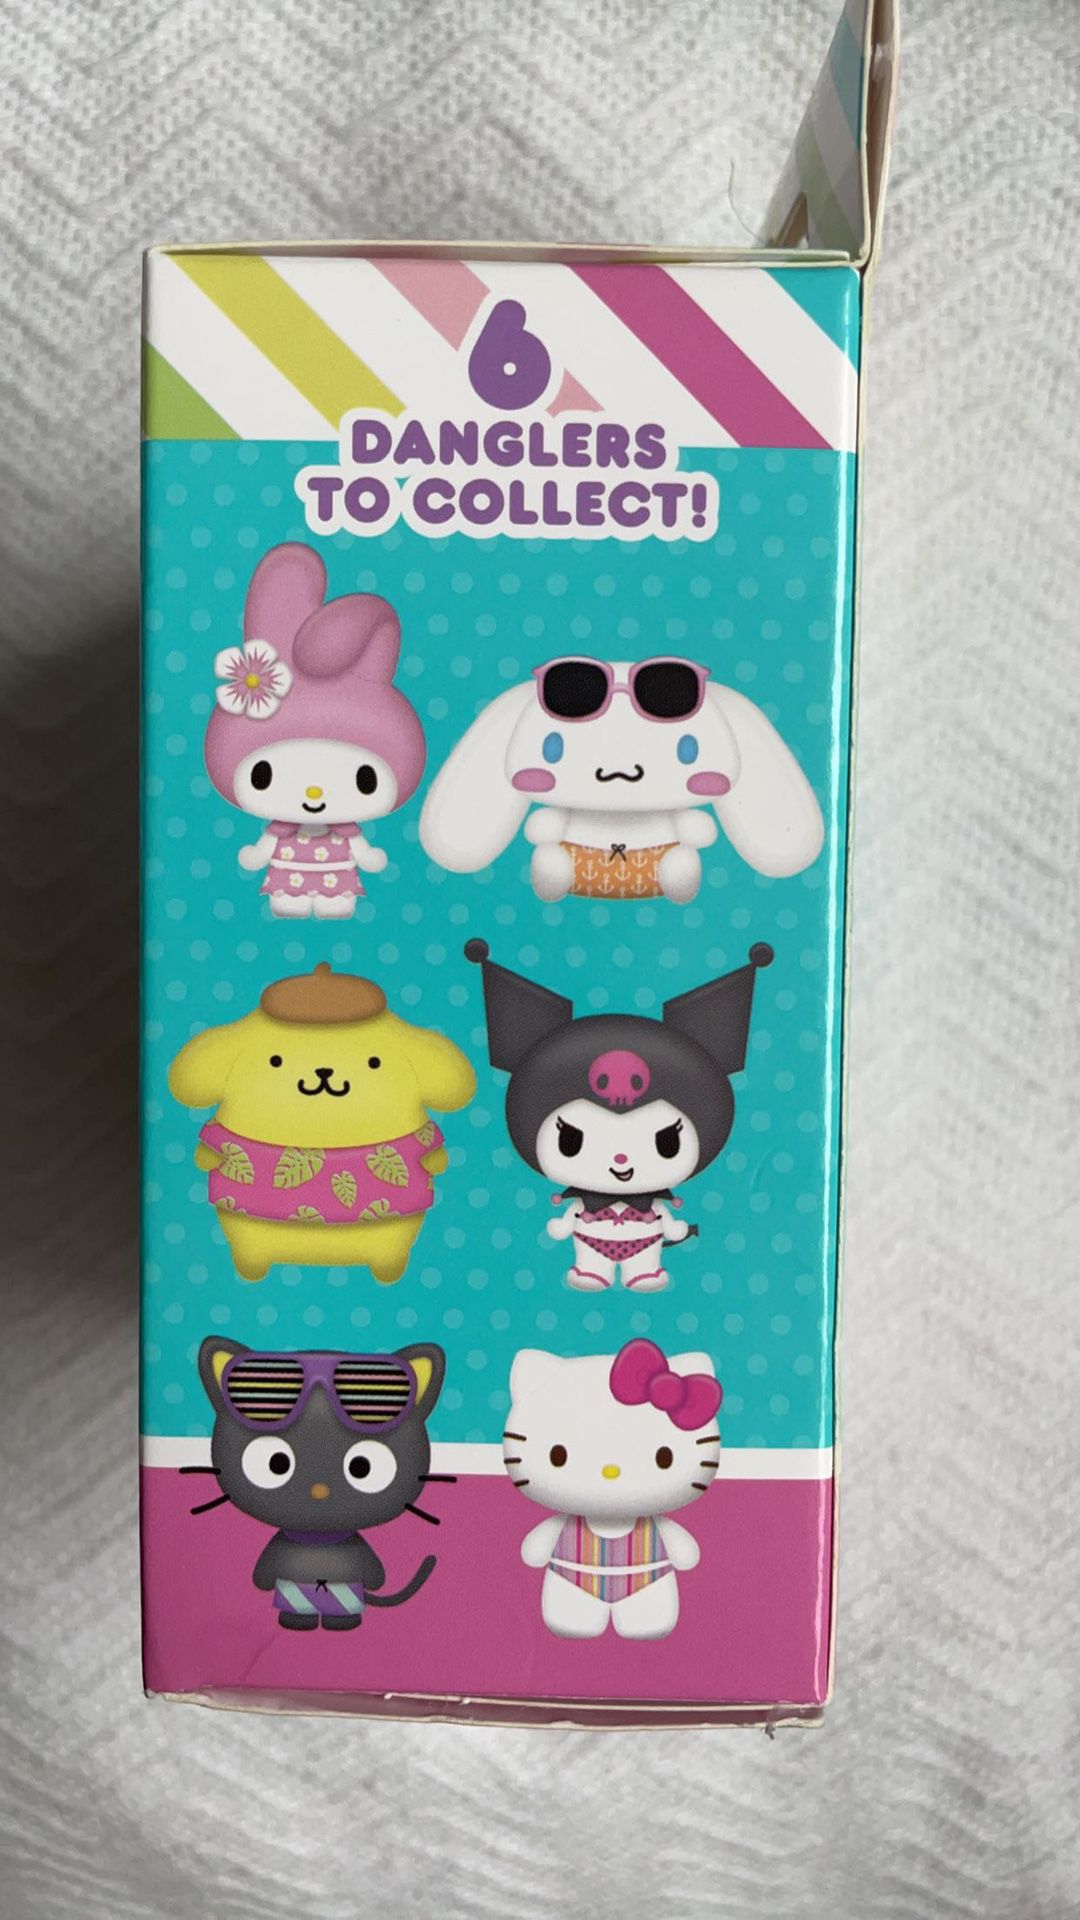 Hello Kitty Easter Theme Gifts 